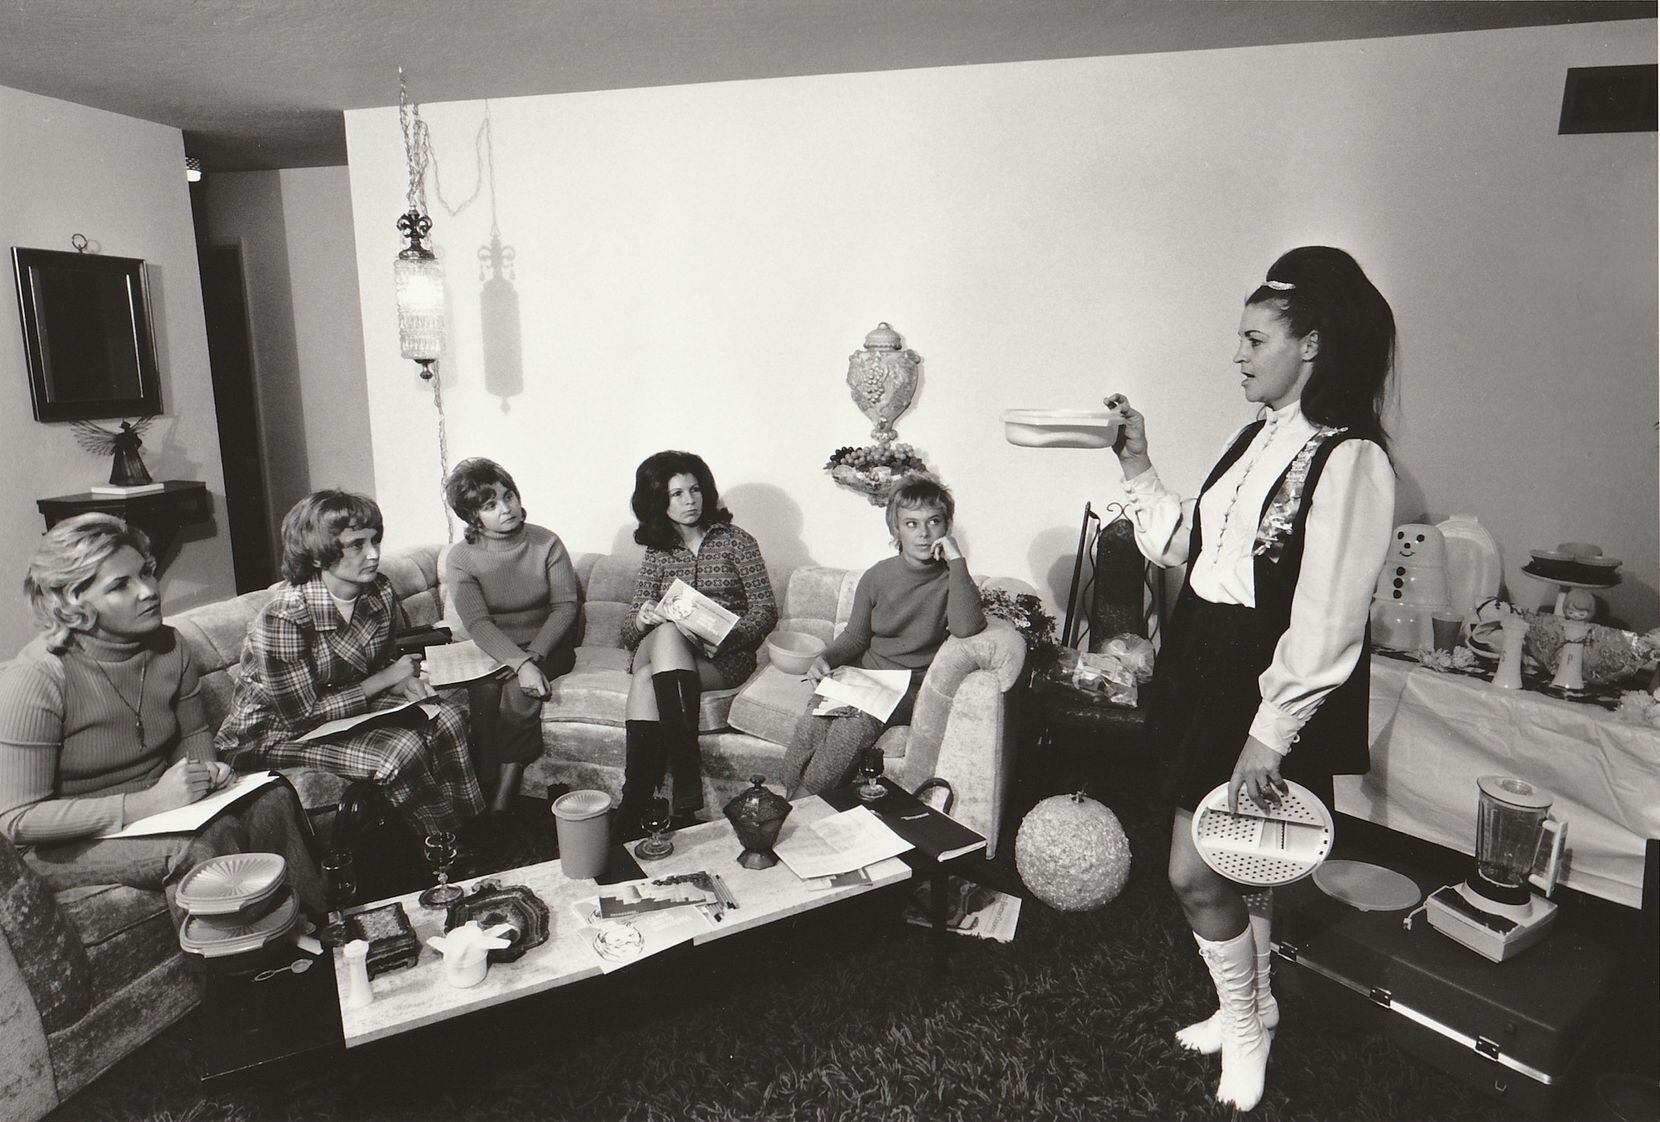 Bill Owens' "Tupperware Party" captures a moment in suburban Livermore, Calif., in 1968....